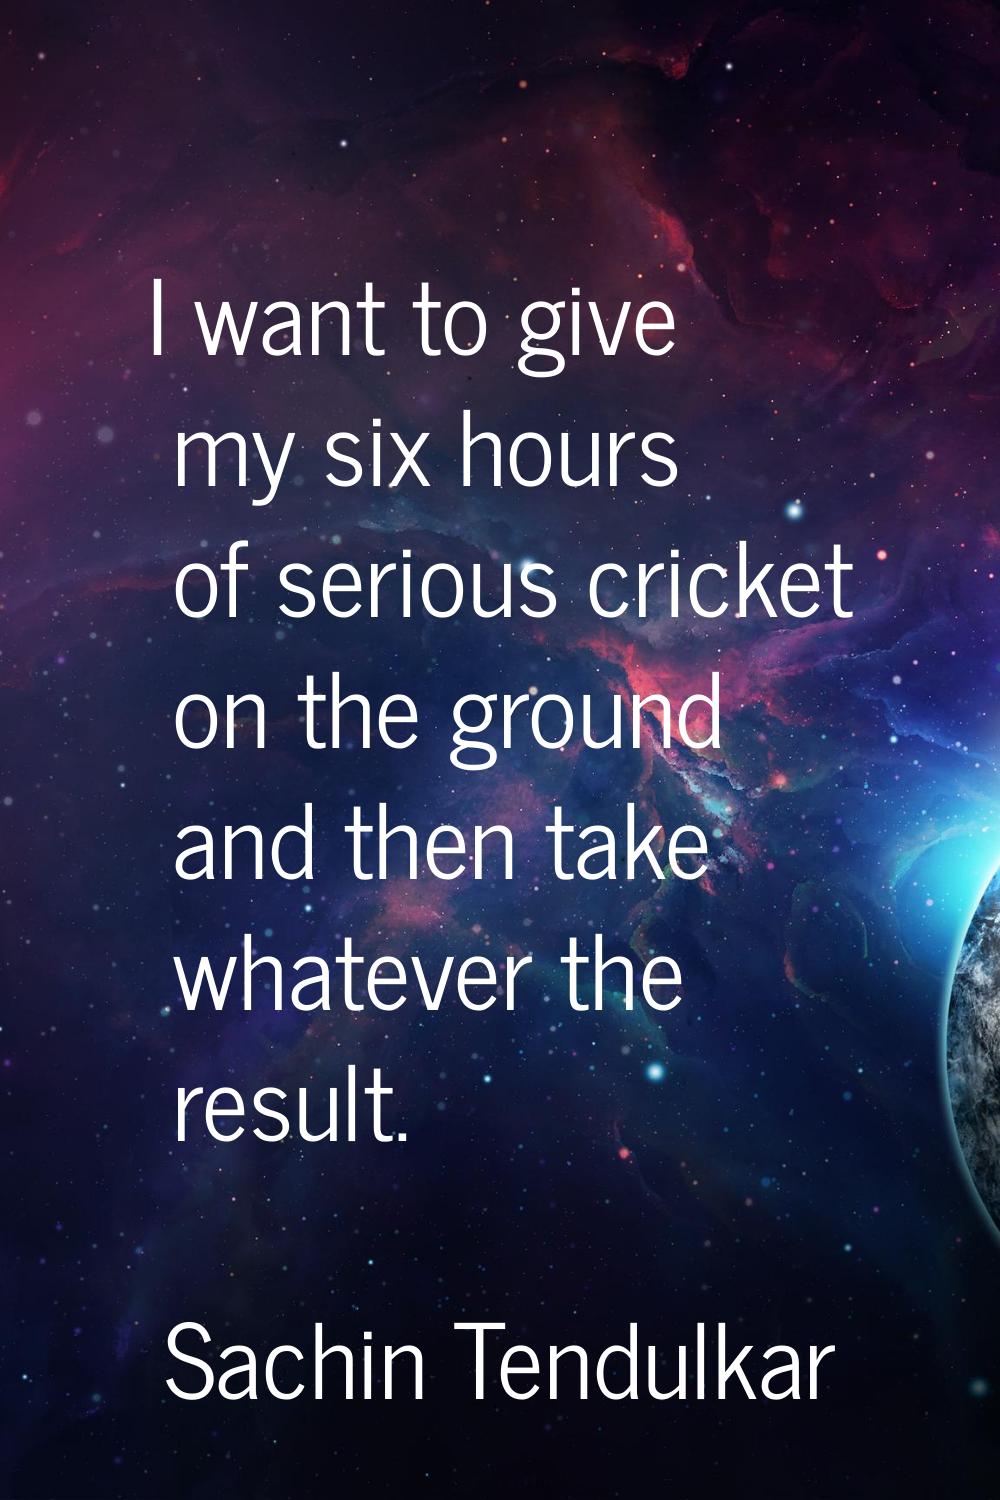 I want to give my six hours of serious cricket on the ground and then take whatever the result.